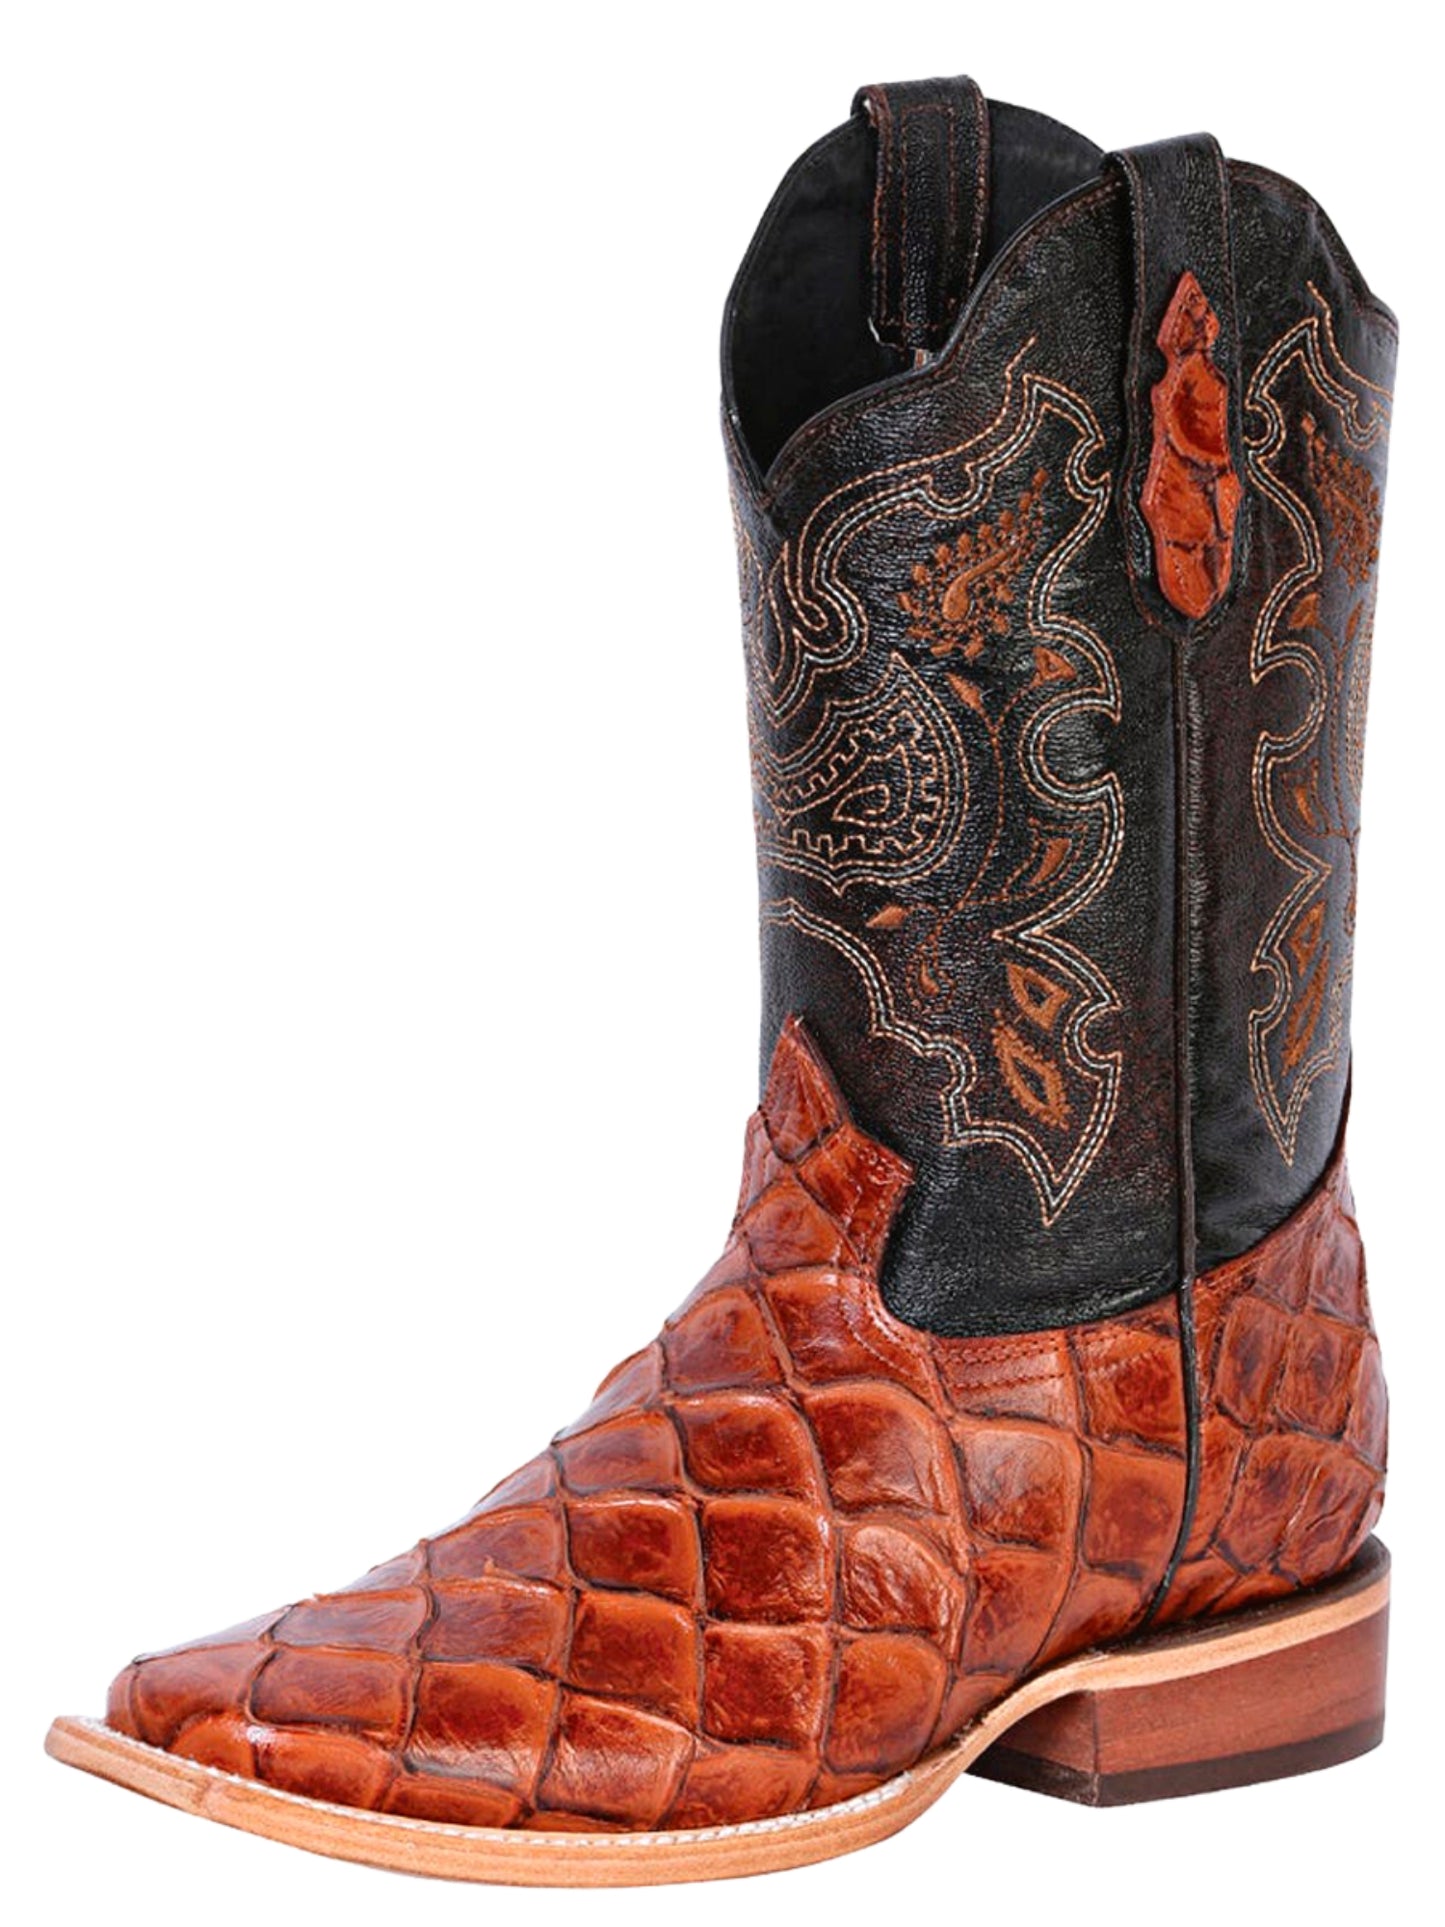 Cowboy Boots Rodeo Imitation of Monster Fish Engraving in Cowhide for Men 'El General' - ID: 41793